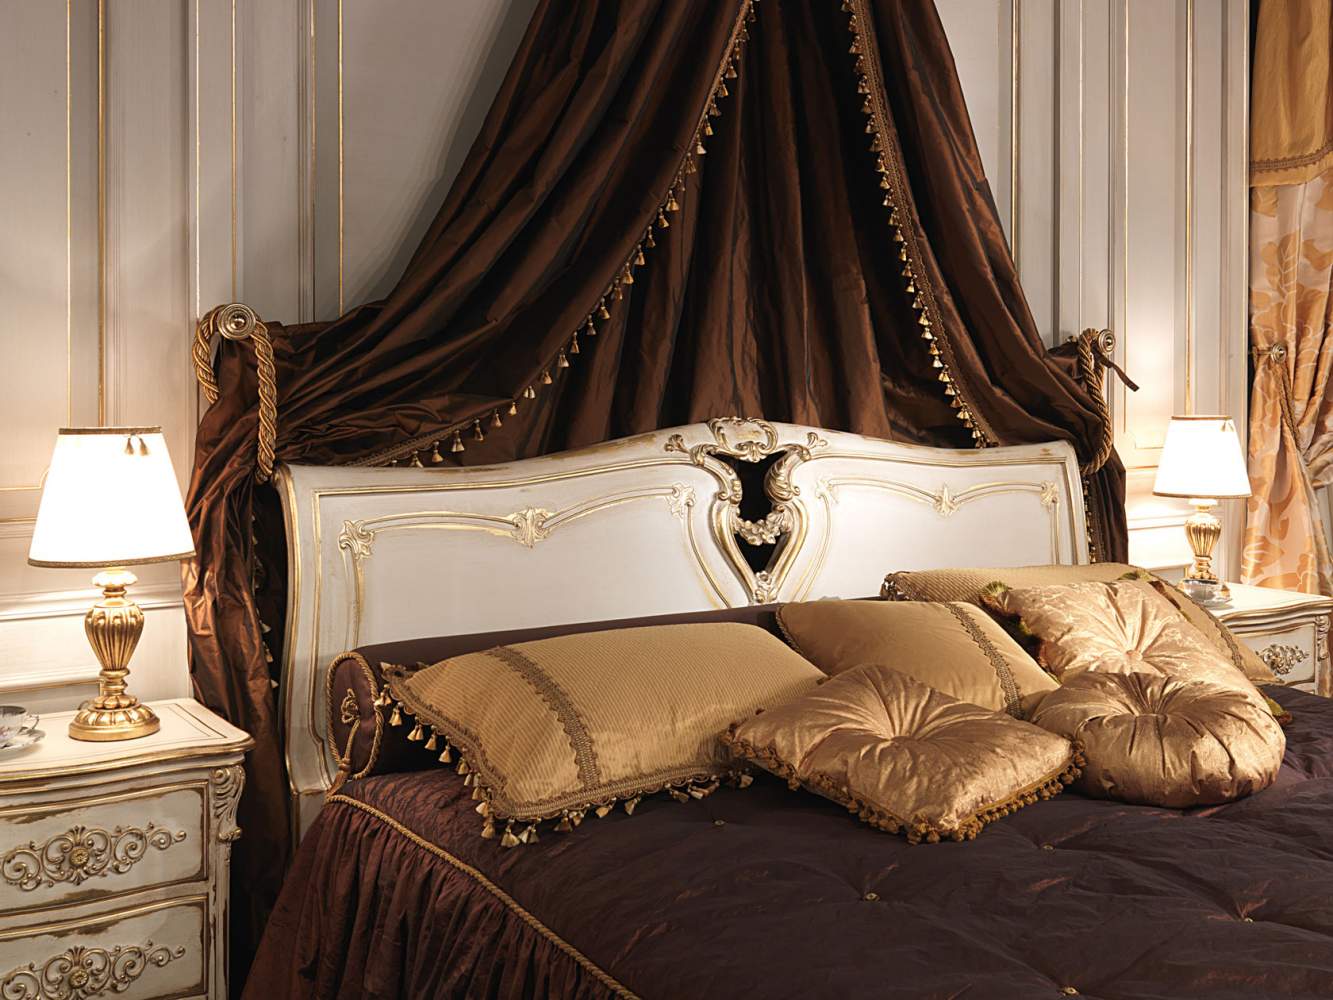 Classic Louis XVI bedroom, carved bed with wall baldaquin. Carved and golden night table